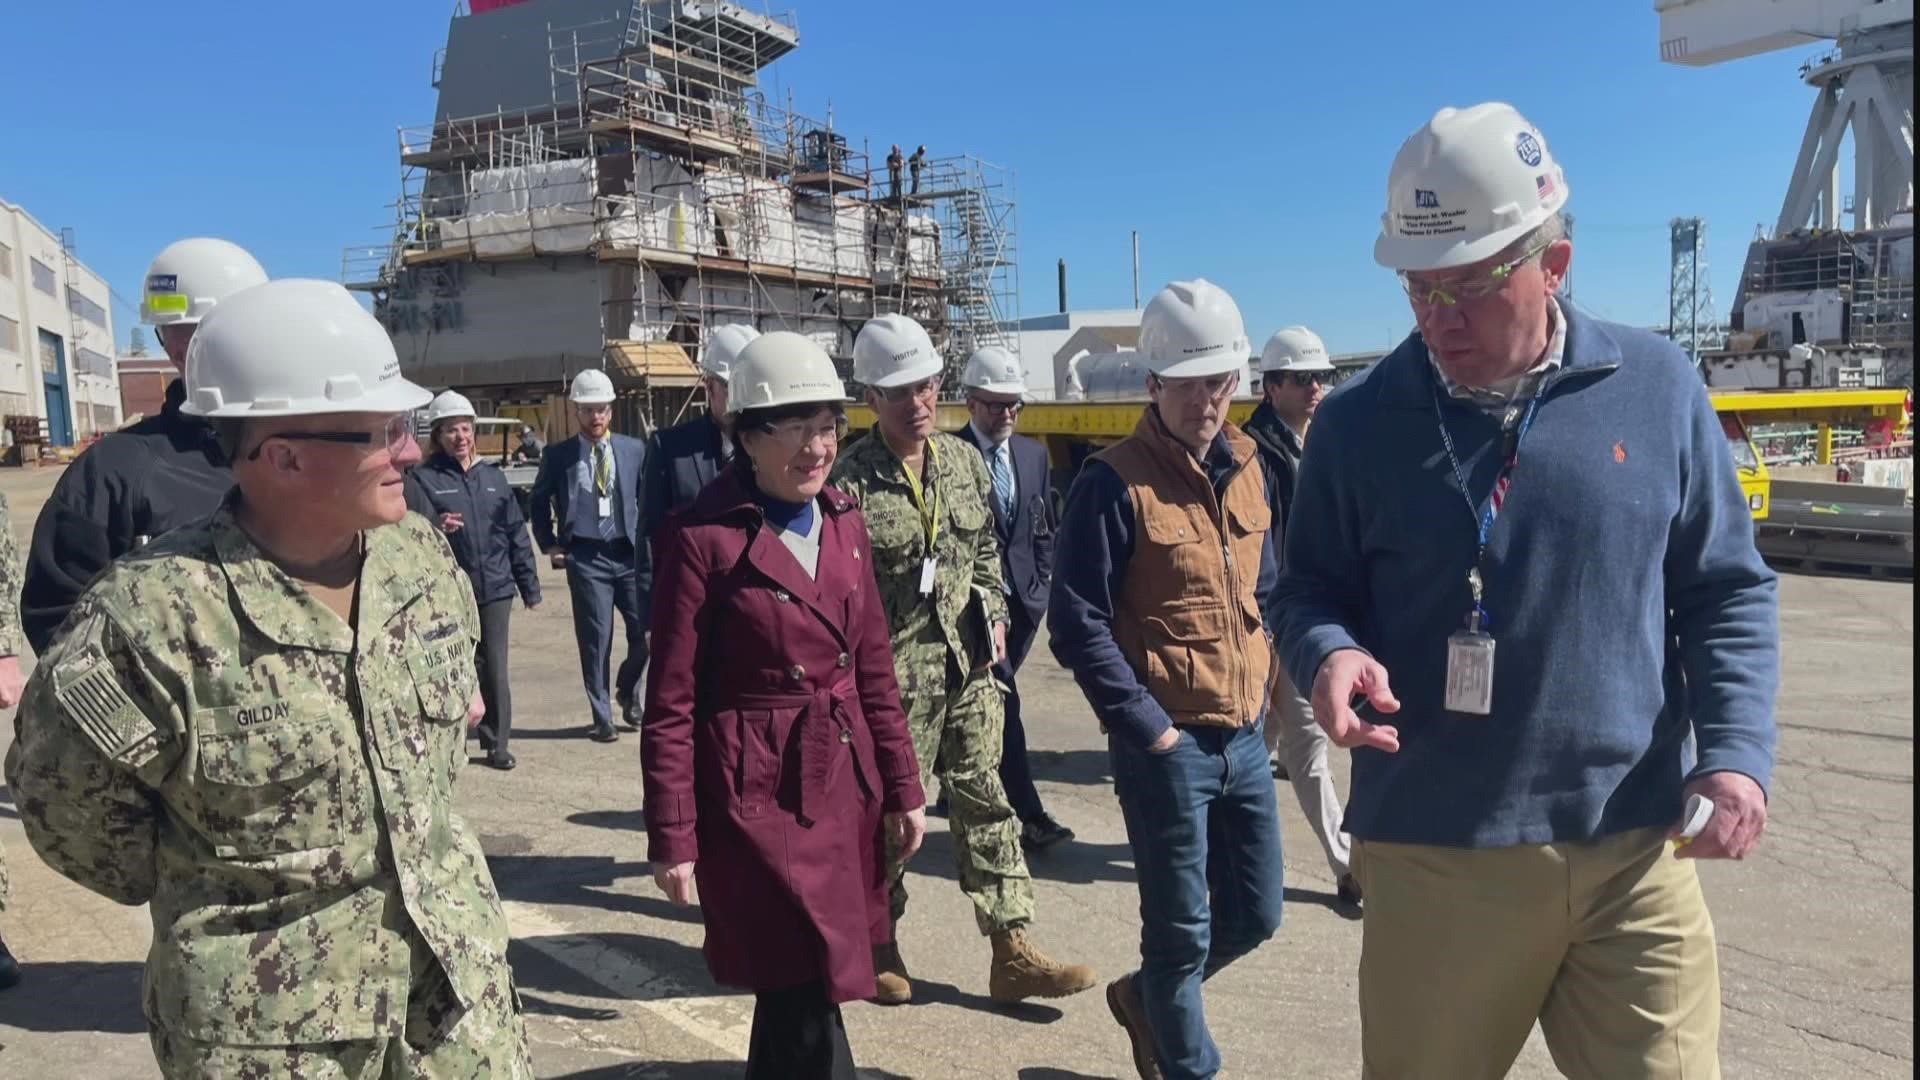 Adm. Michael Gilday visited the Bath shipyard for the second time.